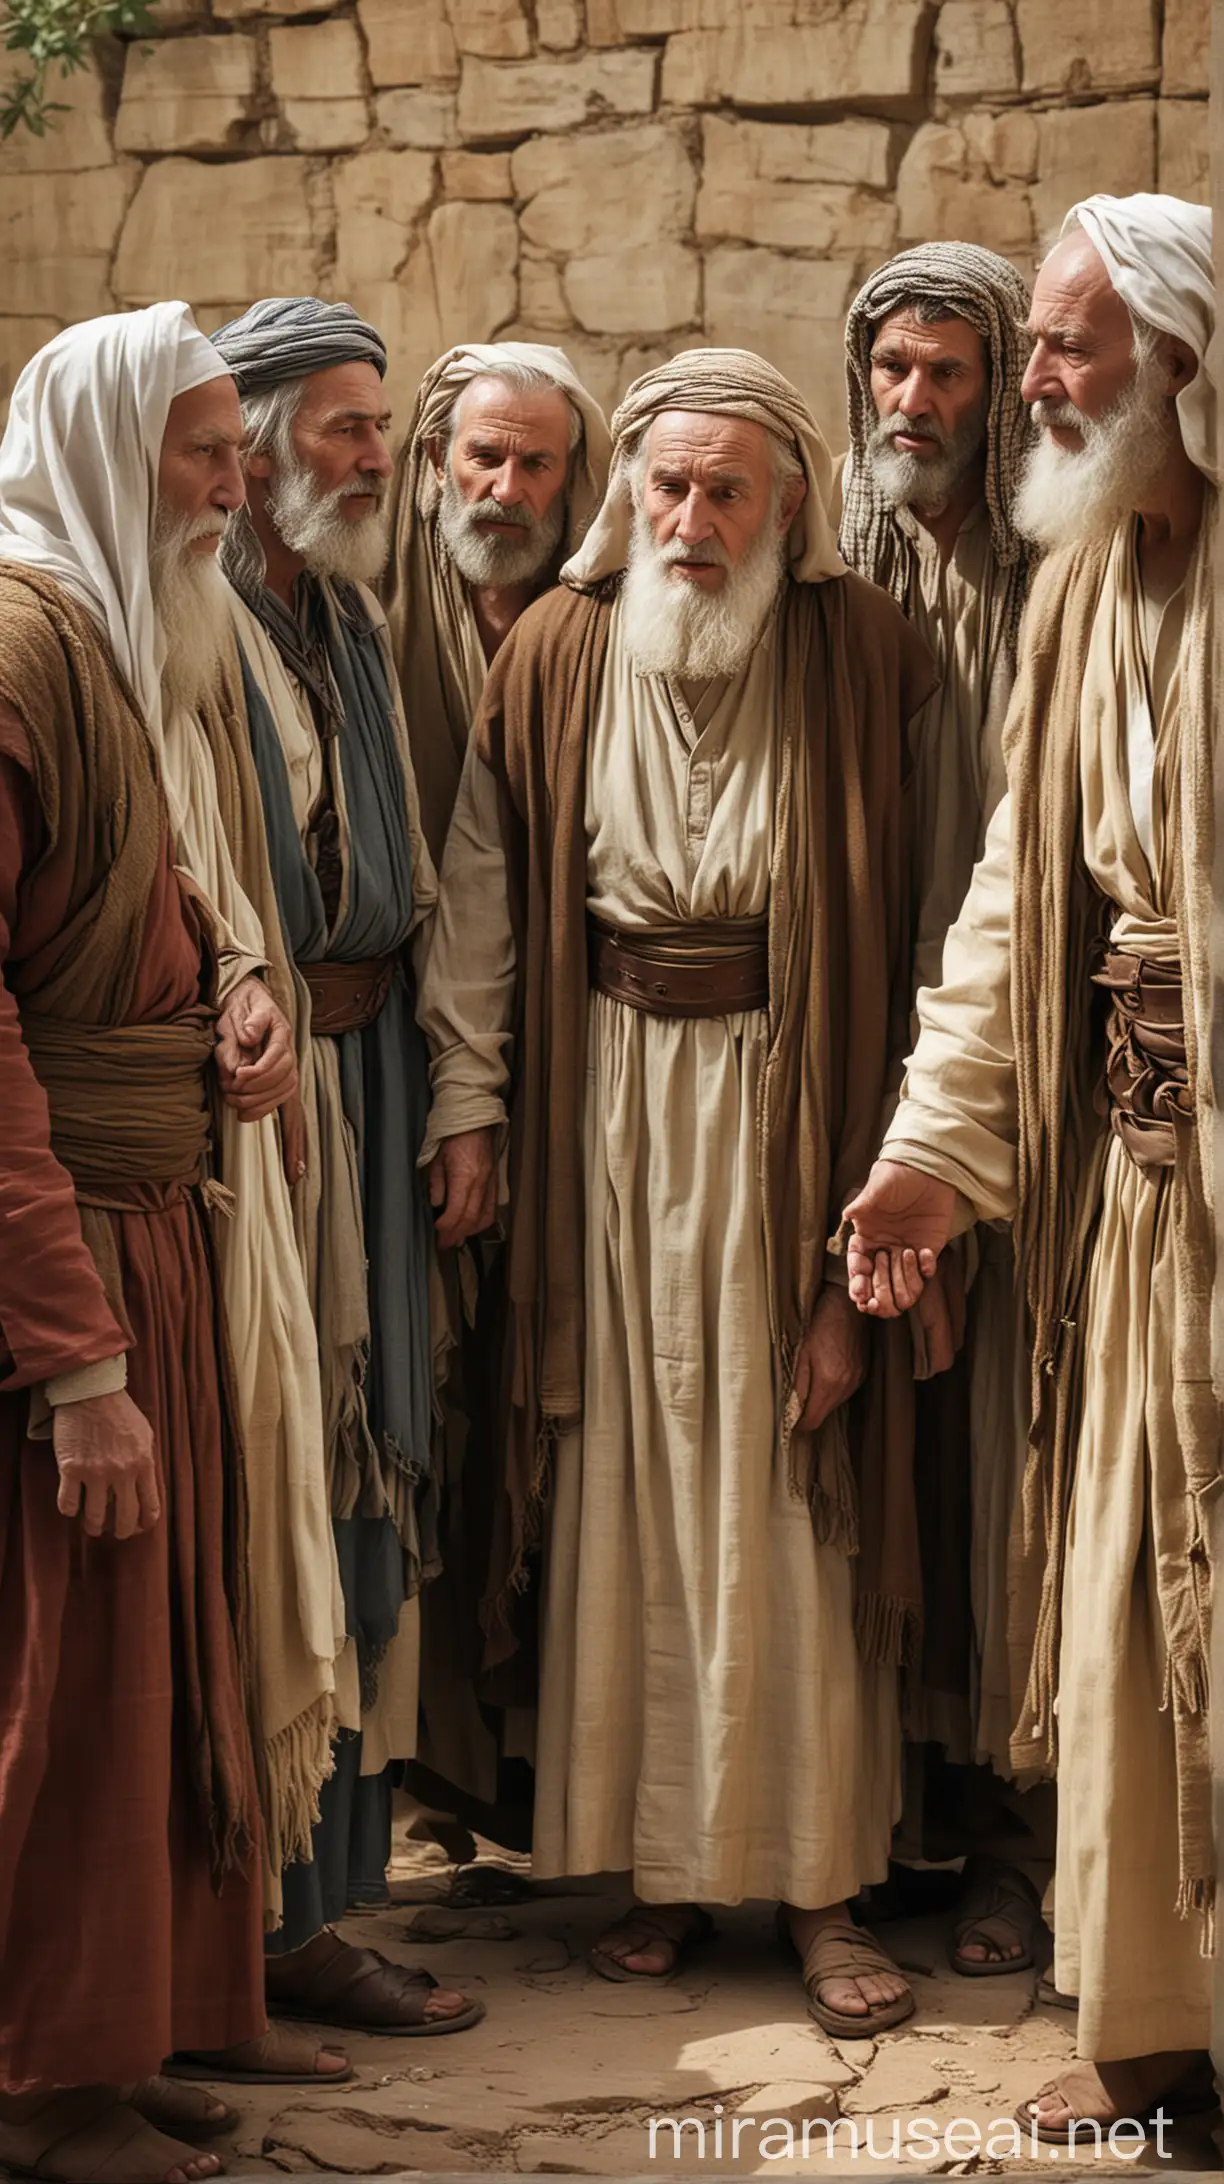 Generate an image of the elders of Israel approaching Samuel. The scene should convey a sense of urgency and concern, with Samuel listening intently to the elders, who appear distressed and desperate for a change in leadership.In ancient world 